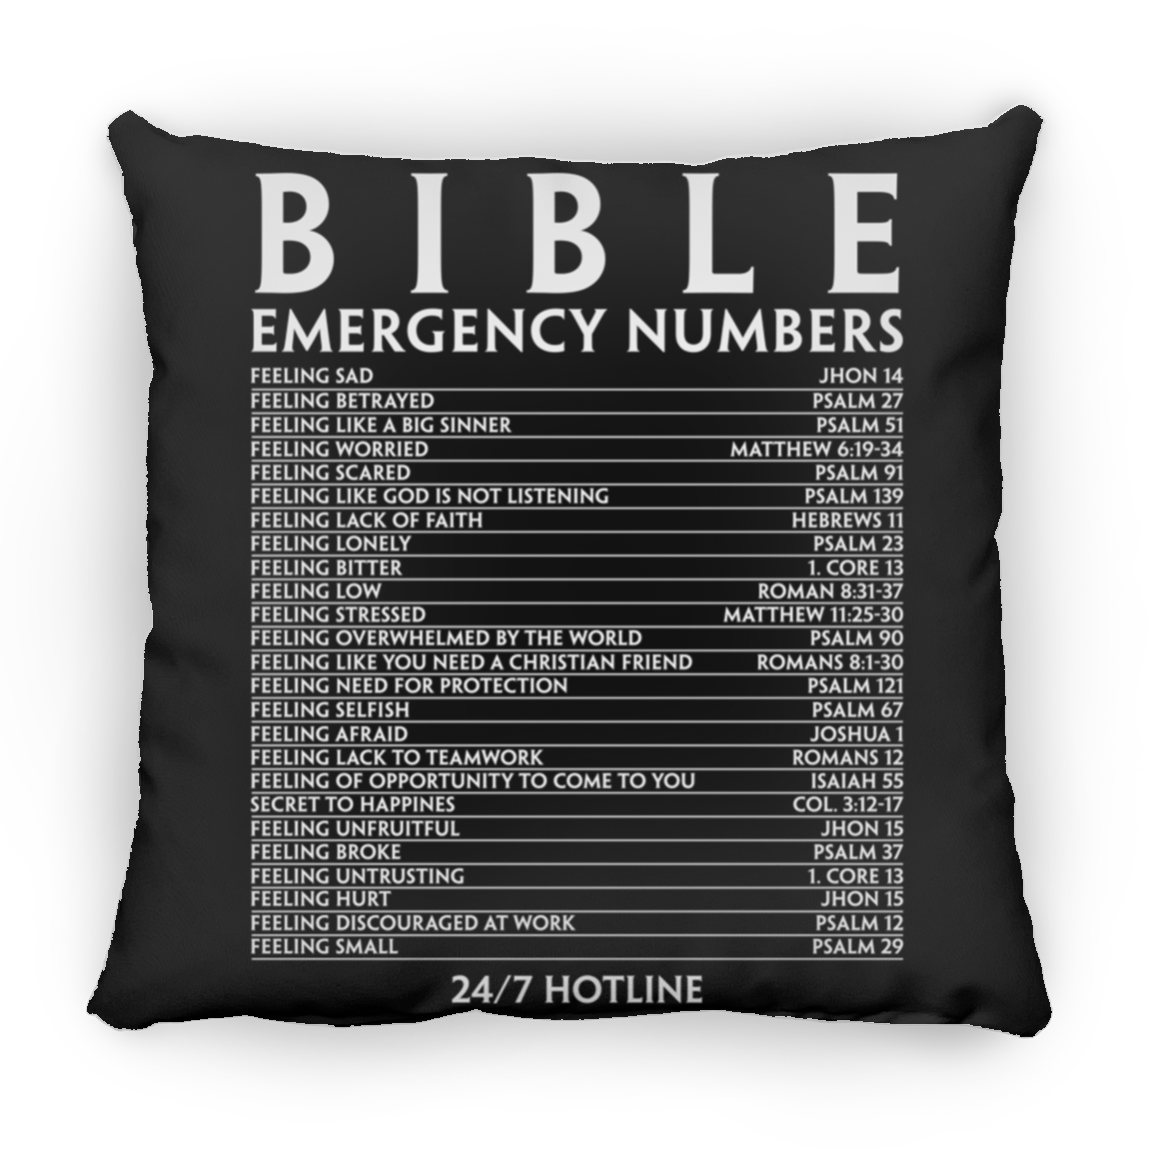 Bible Emergency Numbers Large Square Pillow